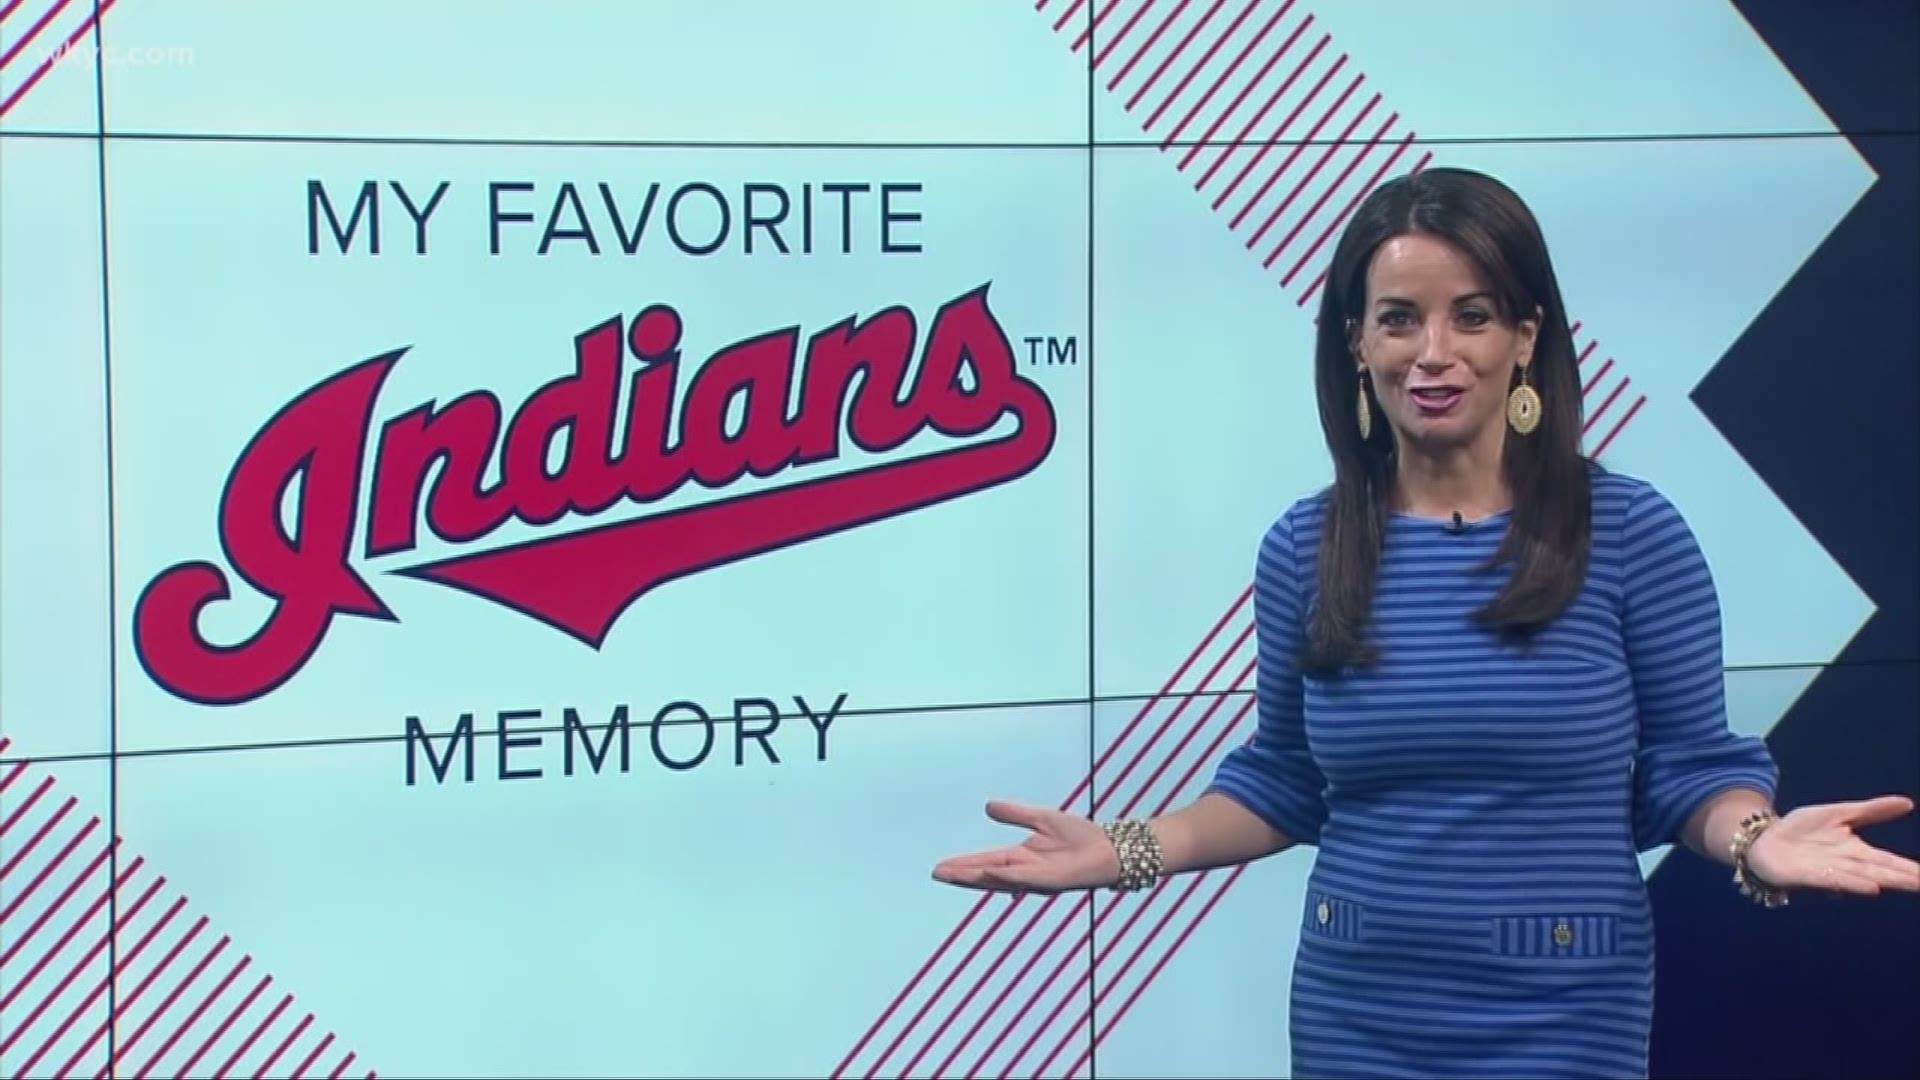 Jan. 10, 2019: When it comes to the Cleveland Indians, it has become a tradition filled with family memories for Hollie Strano.